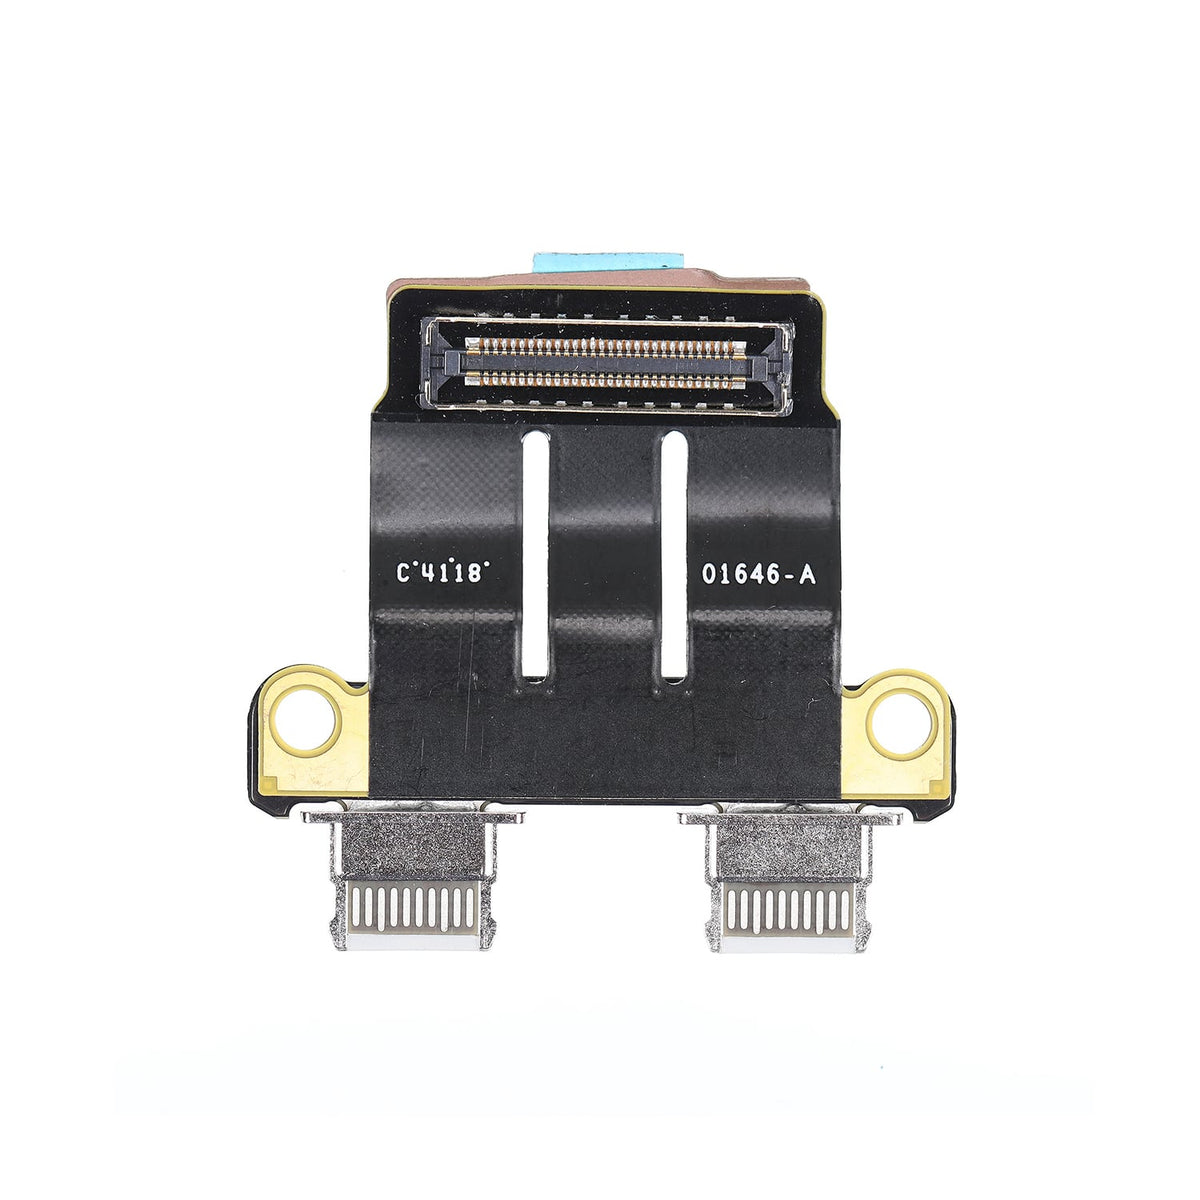 TYPE-C USB I/O BOARD CONNECTOR FOR MACBOOK A1989/A1990/A2159/A2251/A2289/A2141/A2337/A2338 (MID 2018, LATE 2020)